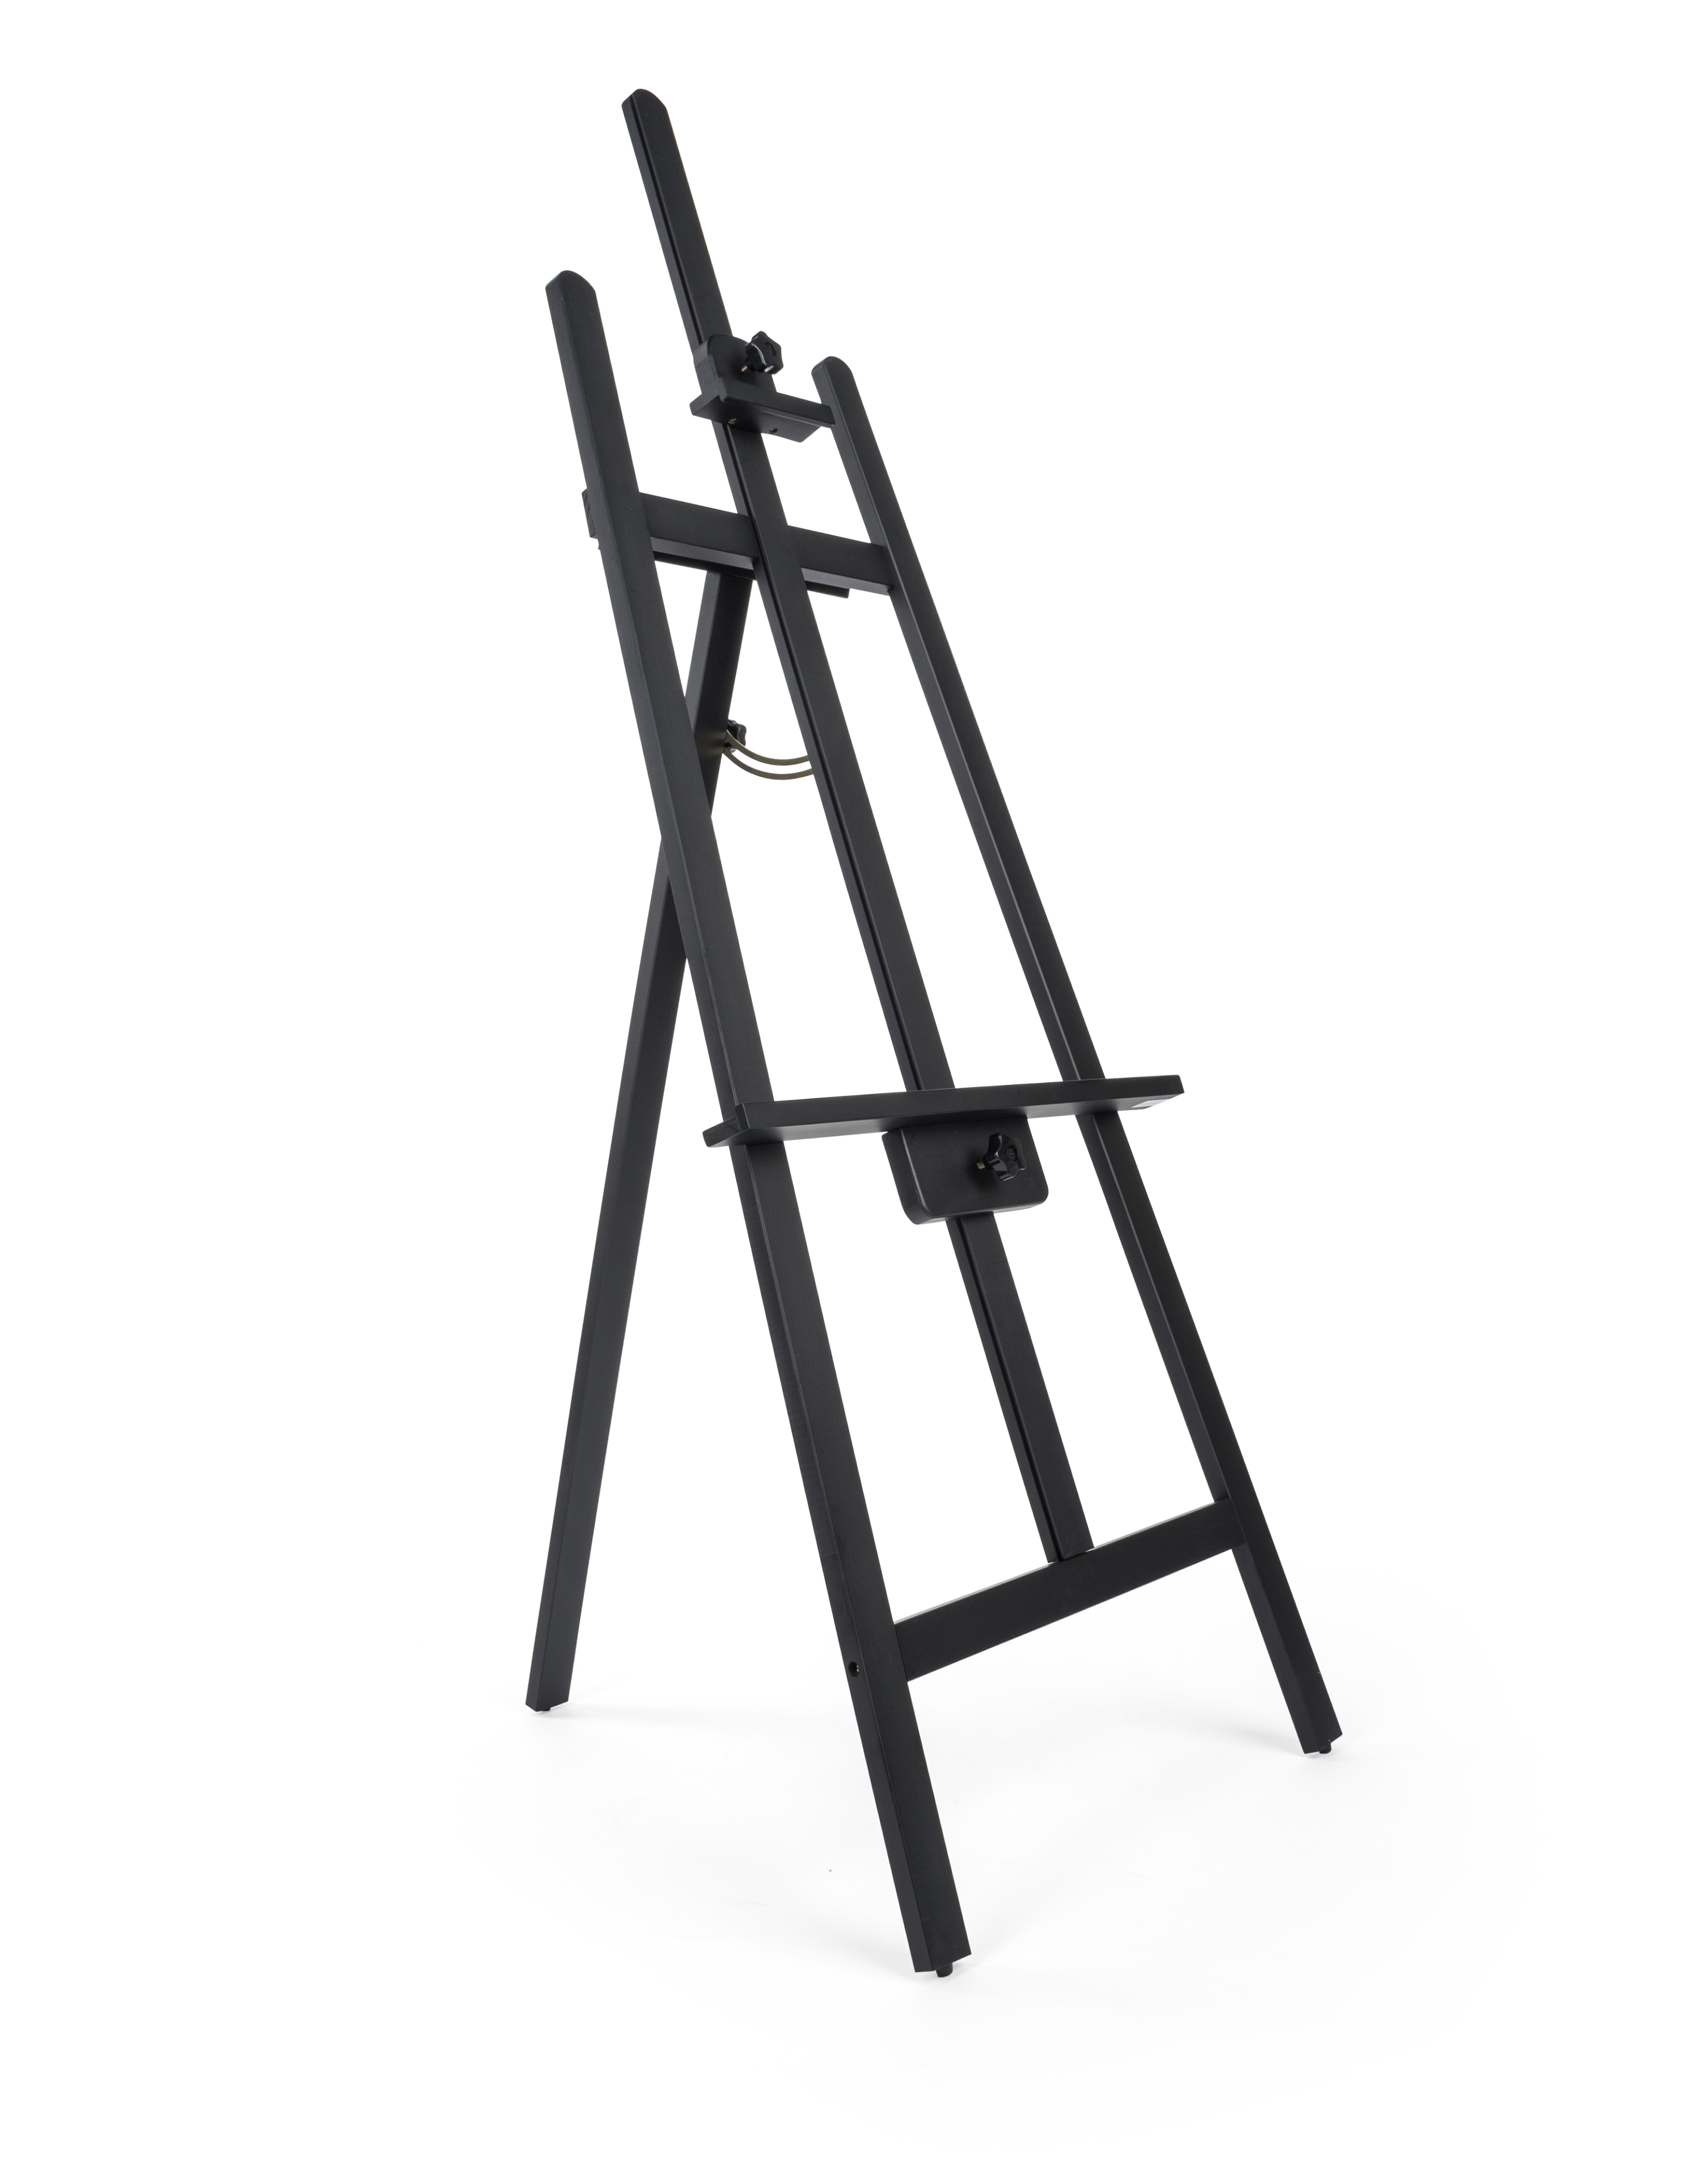 Wood Easel for Floor with Adjustable Top Clamp and Bottom Support